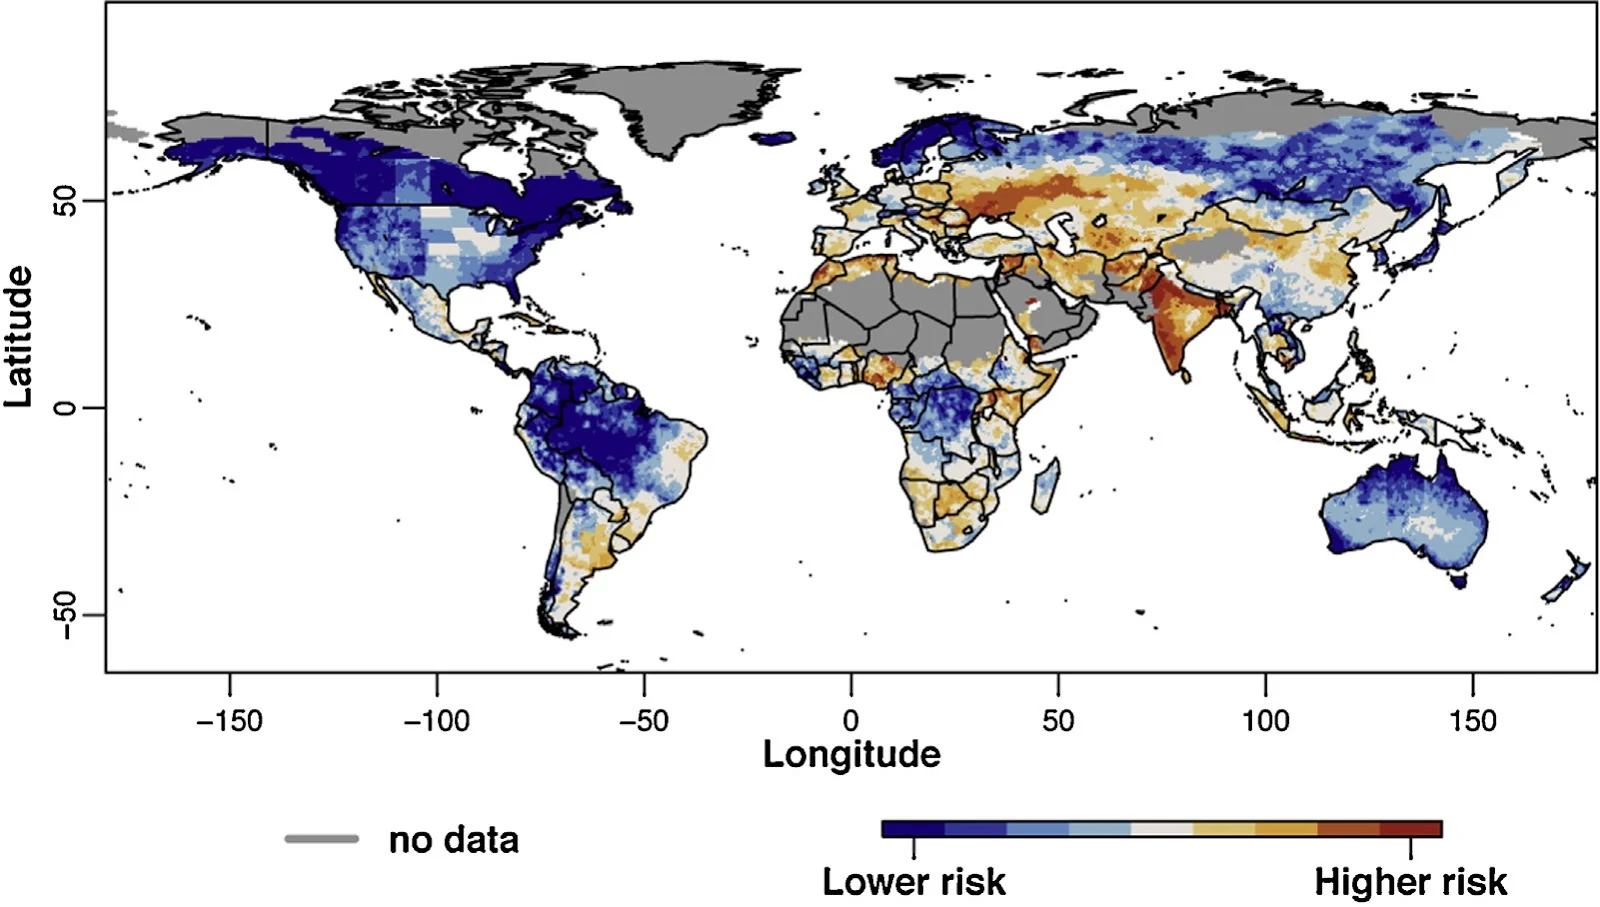 Global map of drought risk, from new JRC study